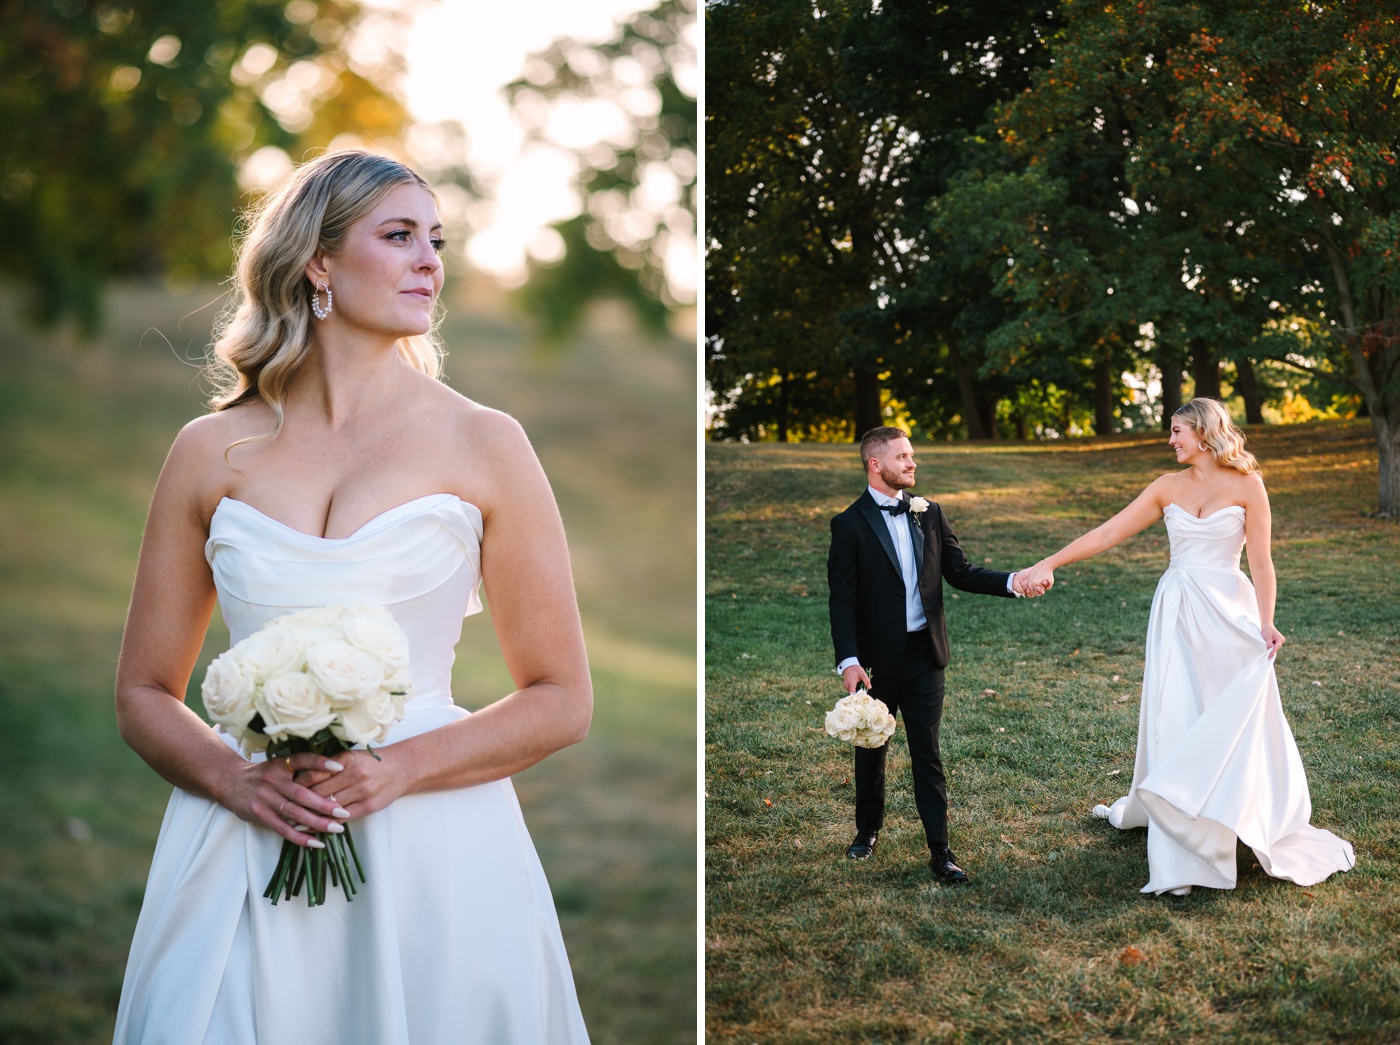 Bridal portraits at Garfield Park in Indianapolis, IN